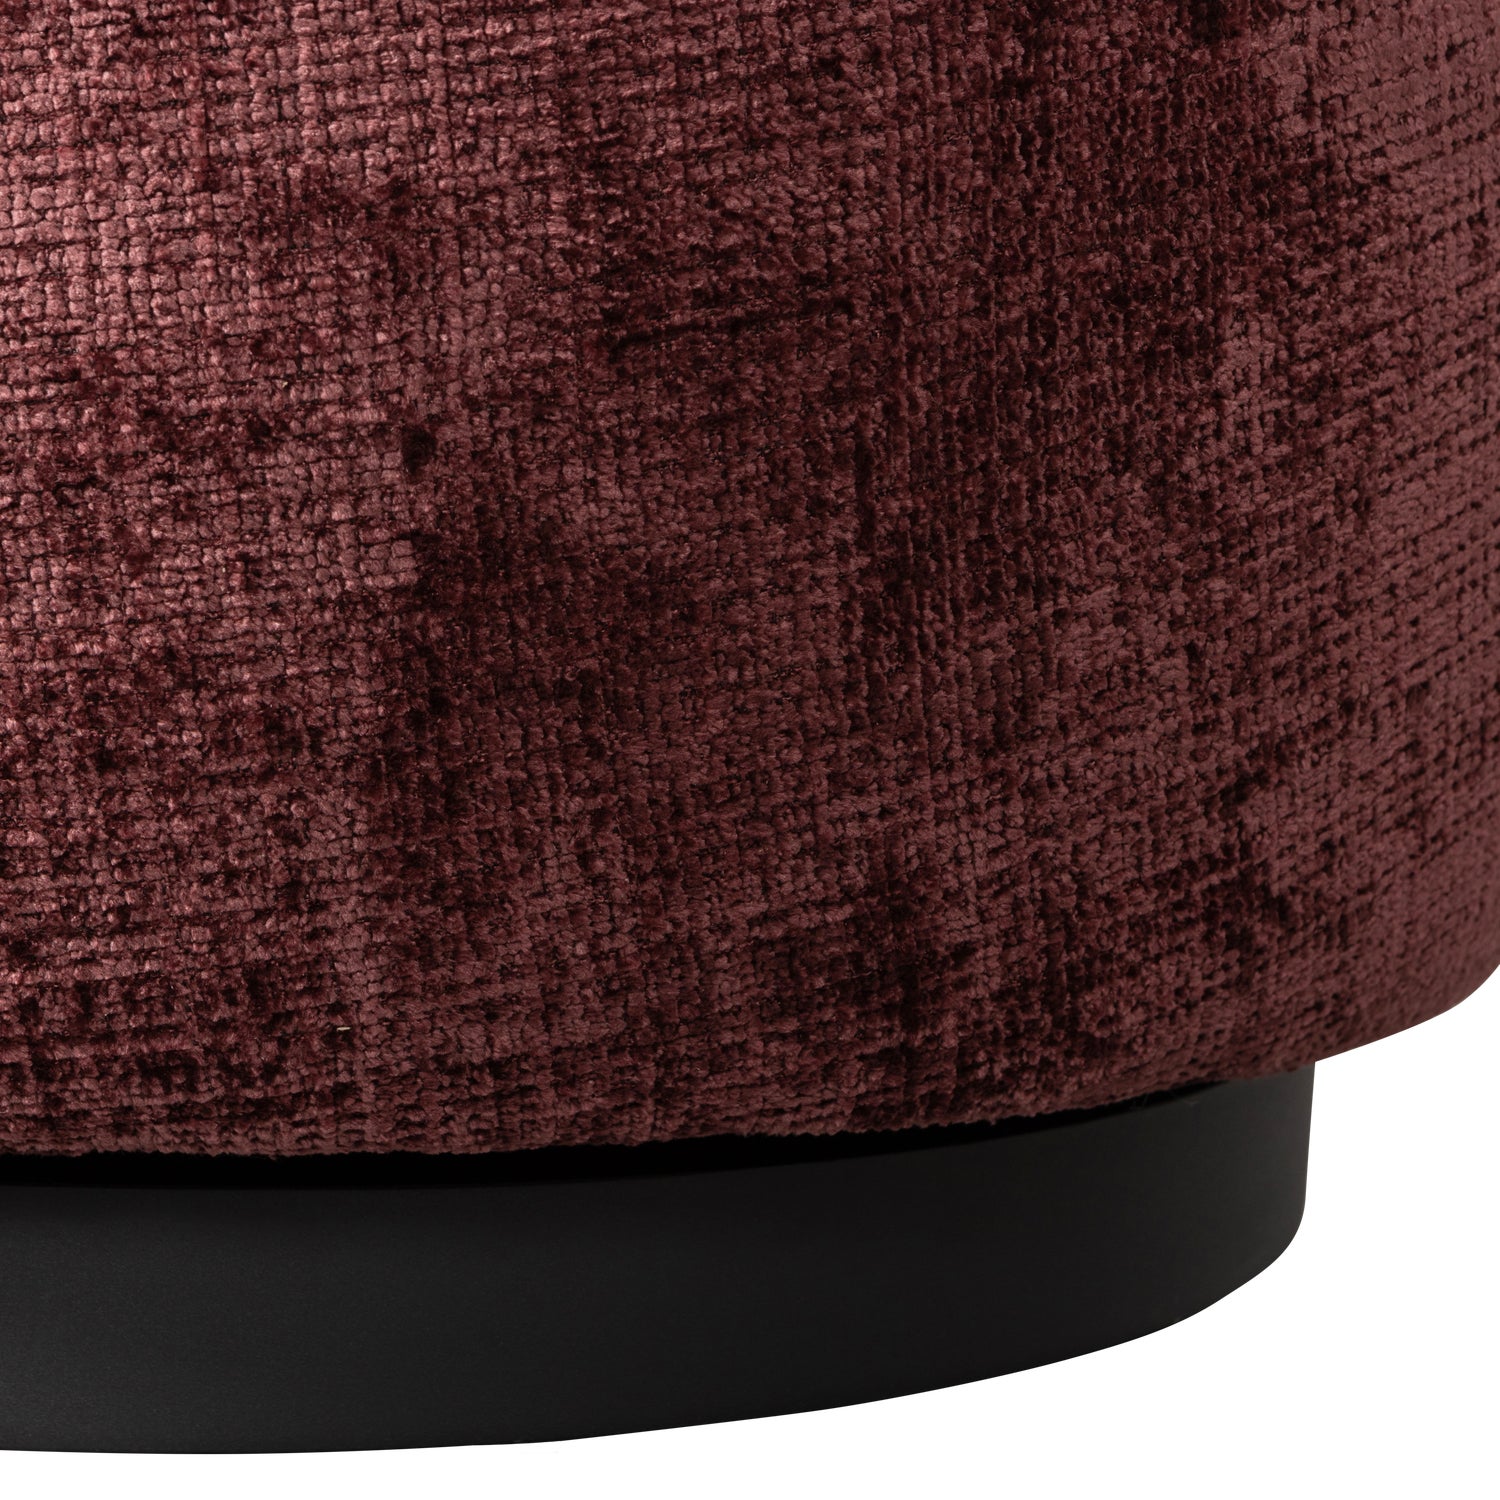 800037-A-02_VS_FA_Woolly_draaifauteuil_chenille_aubergine_detail.png?auto=webp&format=png&width=1500&height=1500